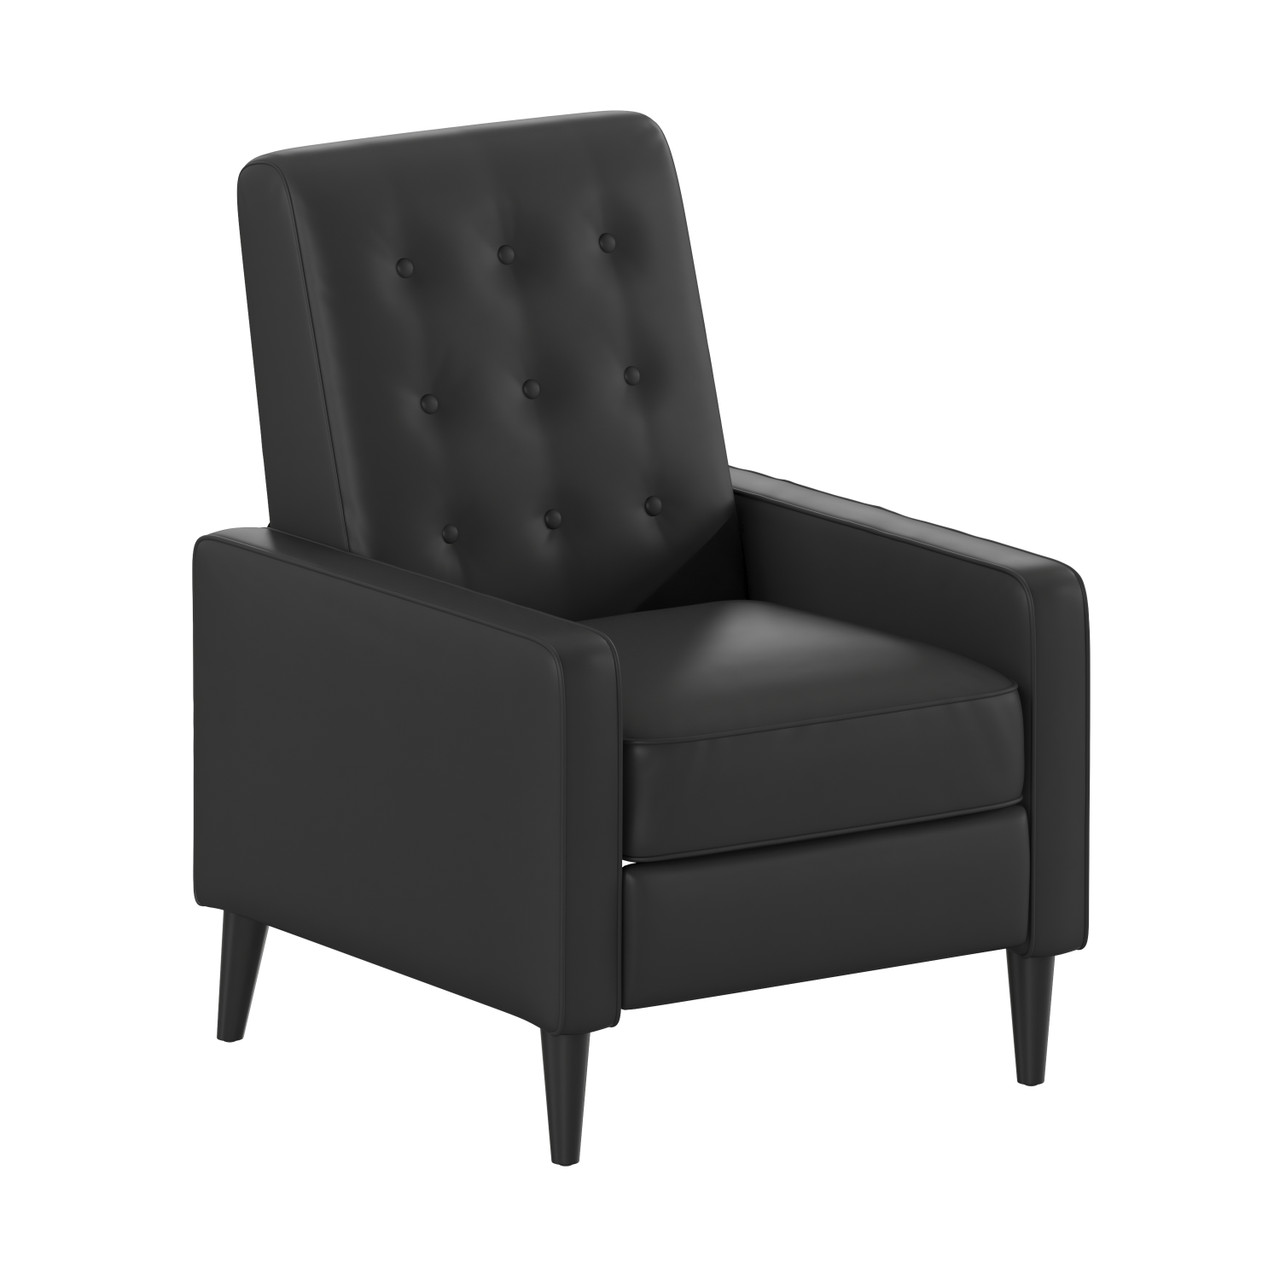 Flash Furniture Ezra Mid-Century Modern LeatherSoft Upholstered Button Tufted Pushback Recliner in Black for Residential & Commercial Use, Model#